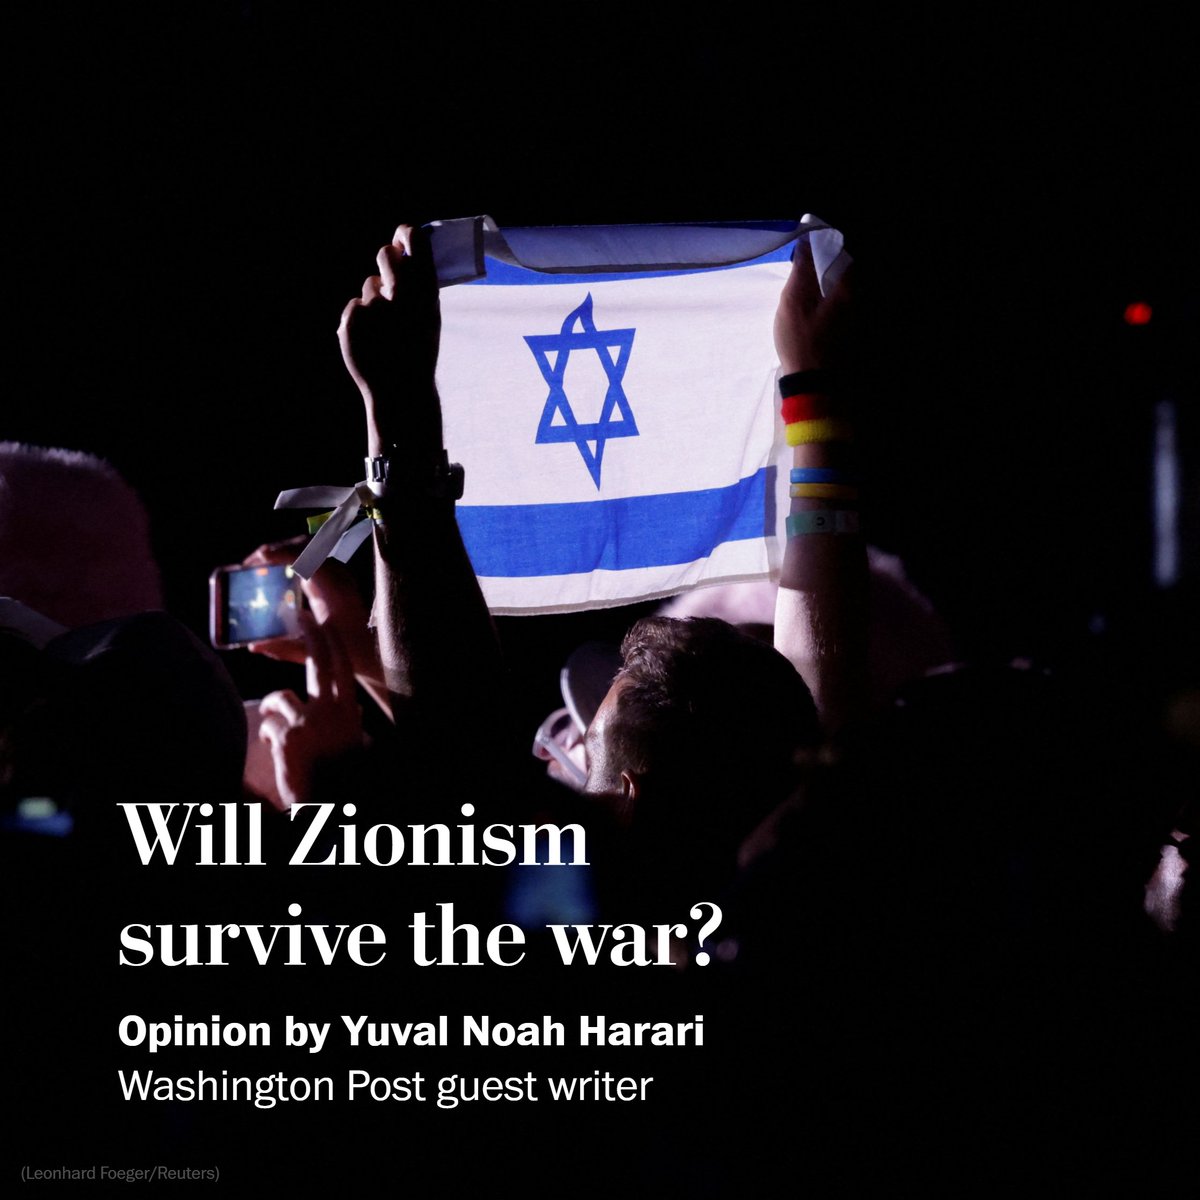 To understand current developments in Israel, as well as the country’s tumultuous history, it is necessary to clarify what Zionism has really meant over its 150 years of existence. New piece for @PostOpinions >> wapo.st/4aid4I0